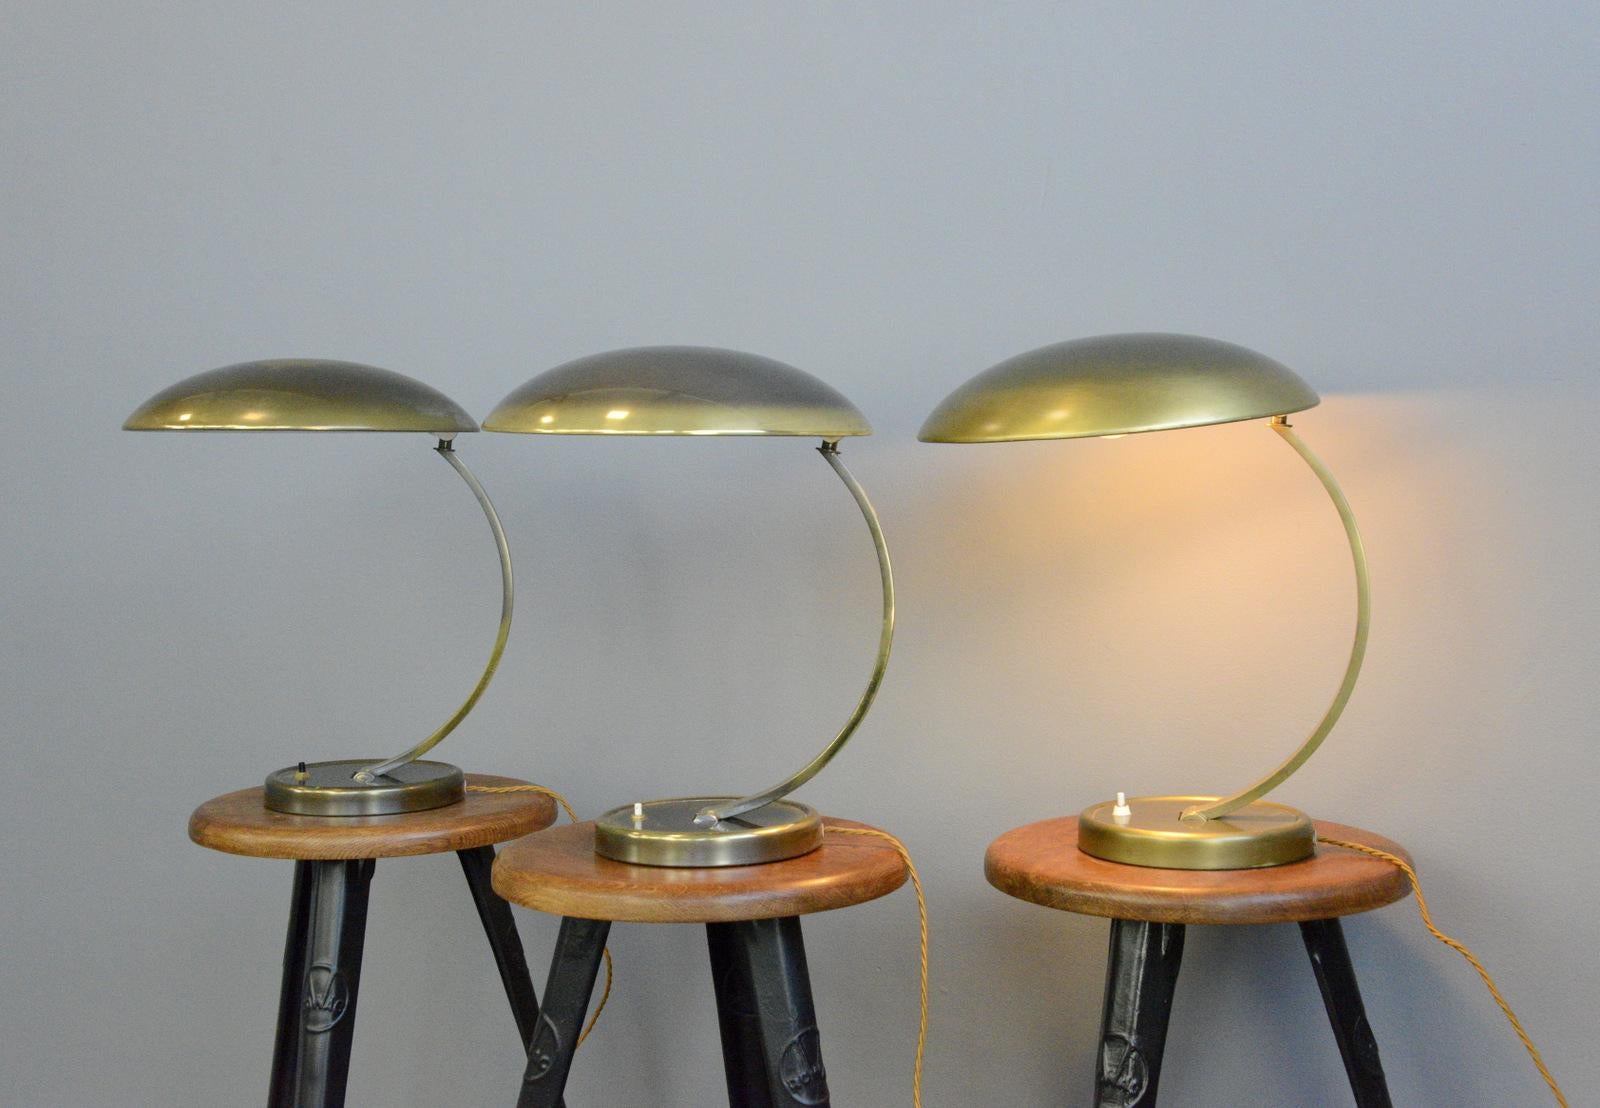 Kaiser Idell model 6751 table lamps, circa 1950s

- Price is per lamp
- Brass arm and shade
- On/Off switch on the base
- Adjustable arm and shade
- Takes E27 fitting bulbs
- German, 1950s
- 40cm tall x 35cm wide x 37cm 

Christian